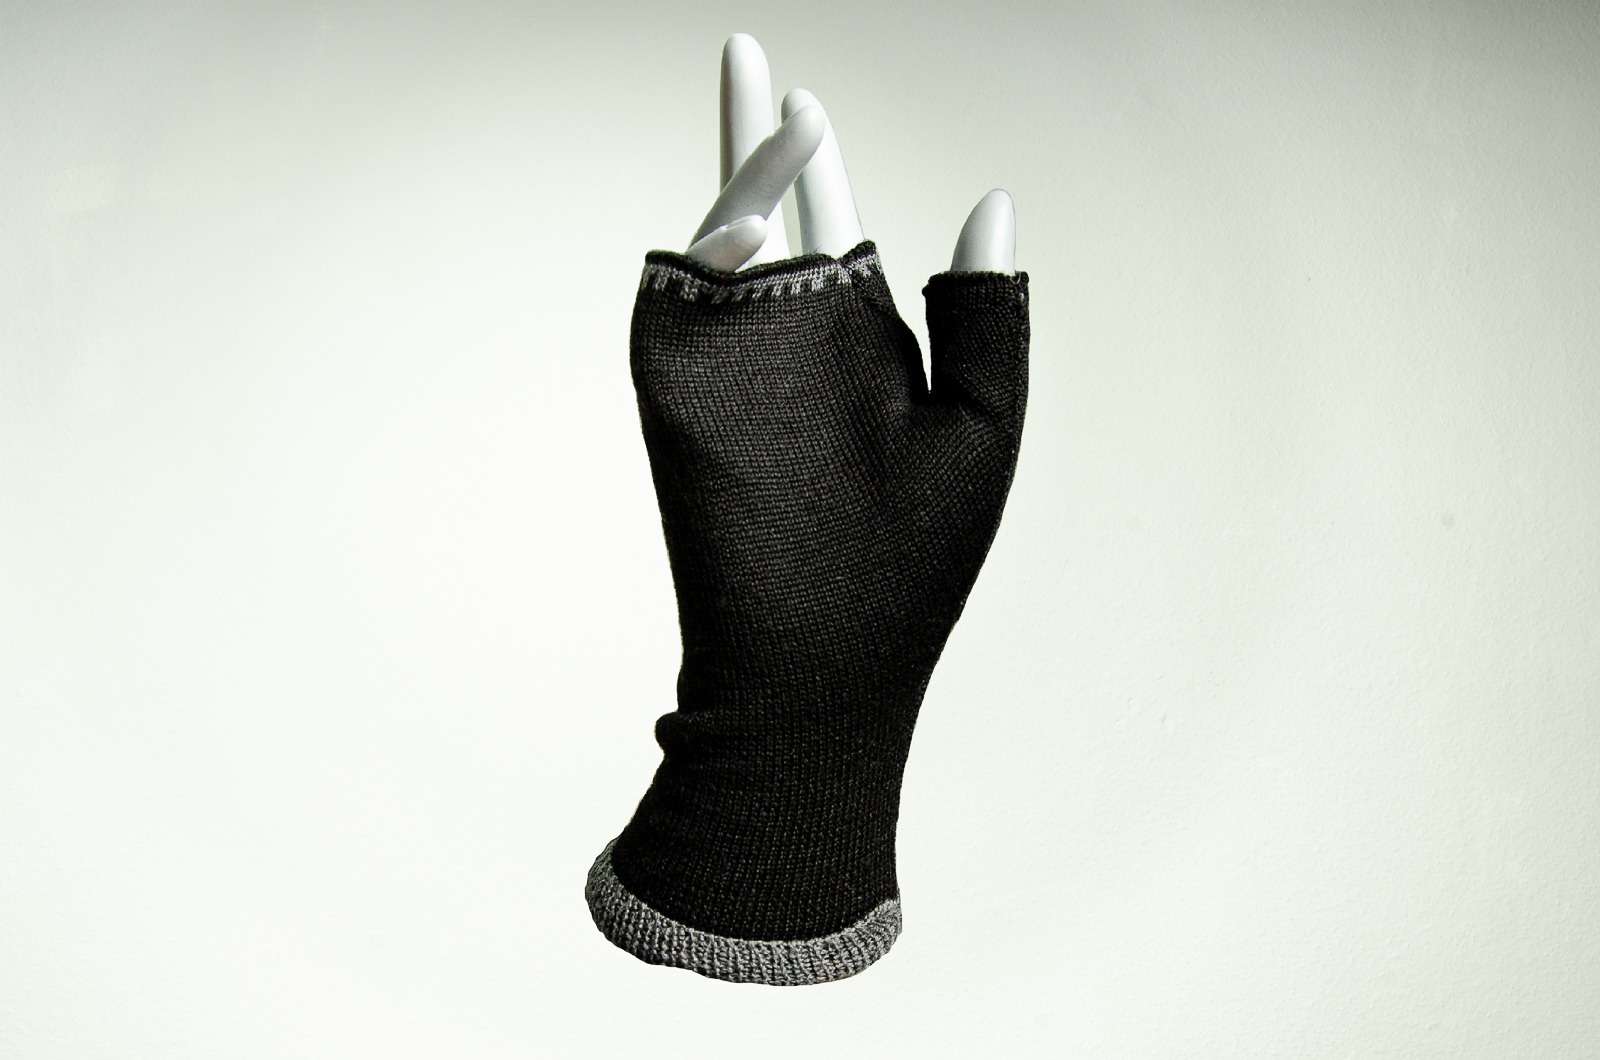 Merino hand warmers in black and gray ladies